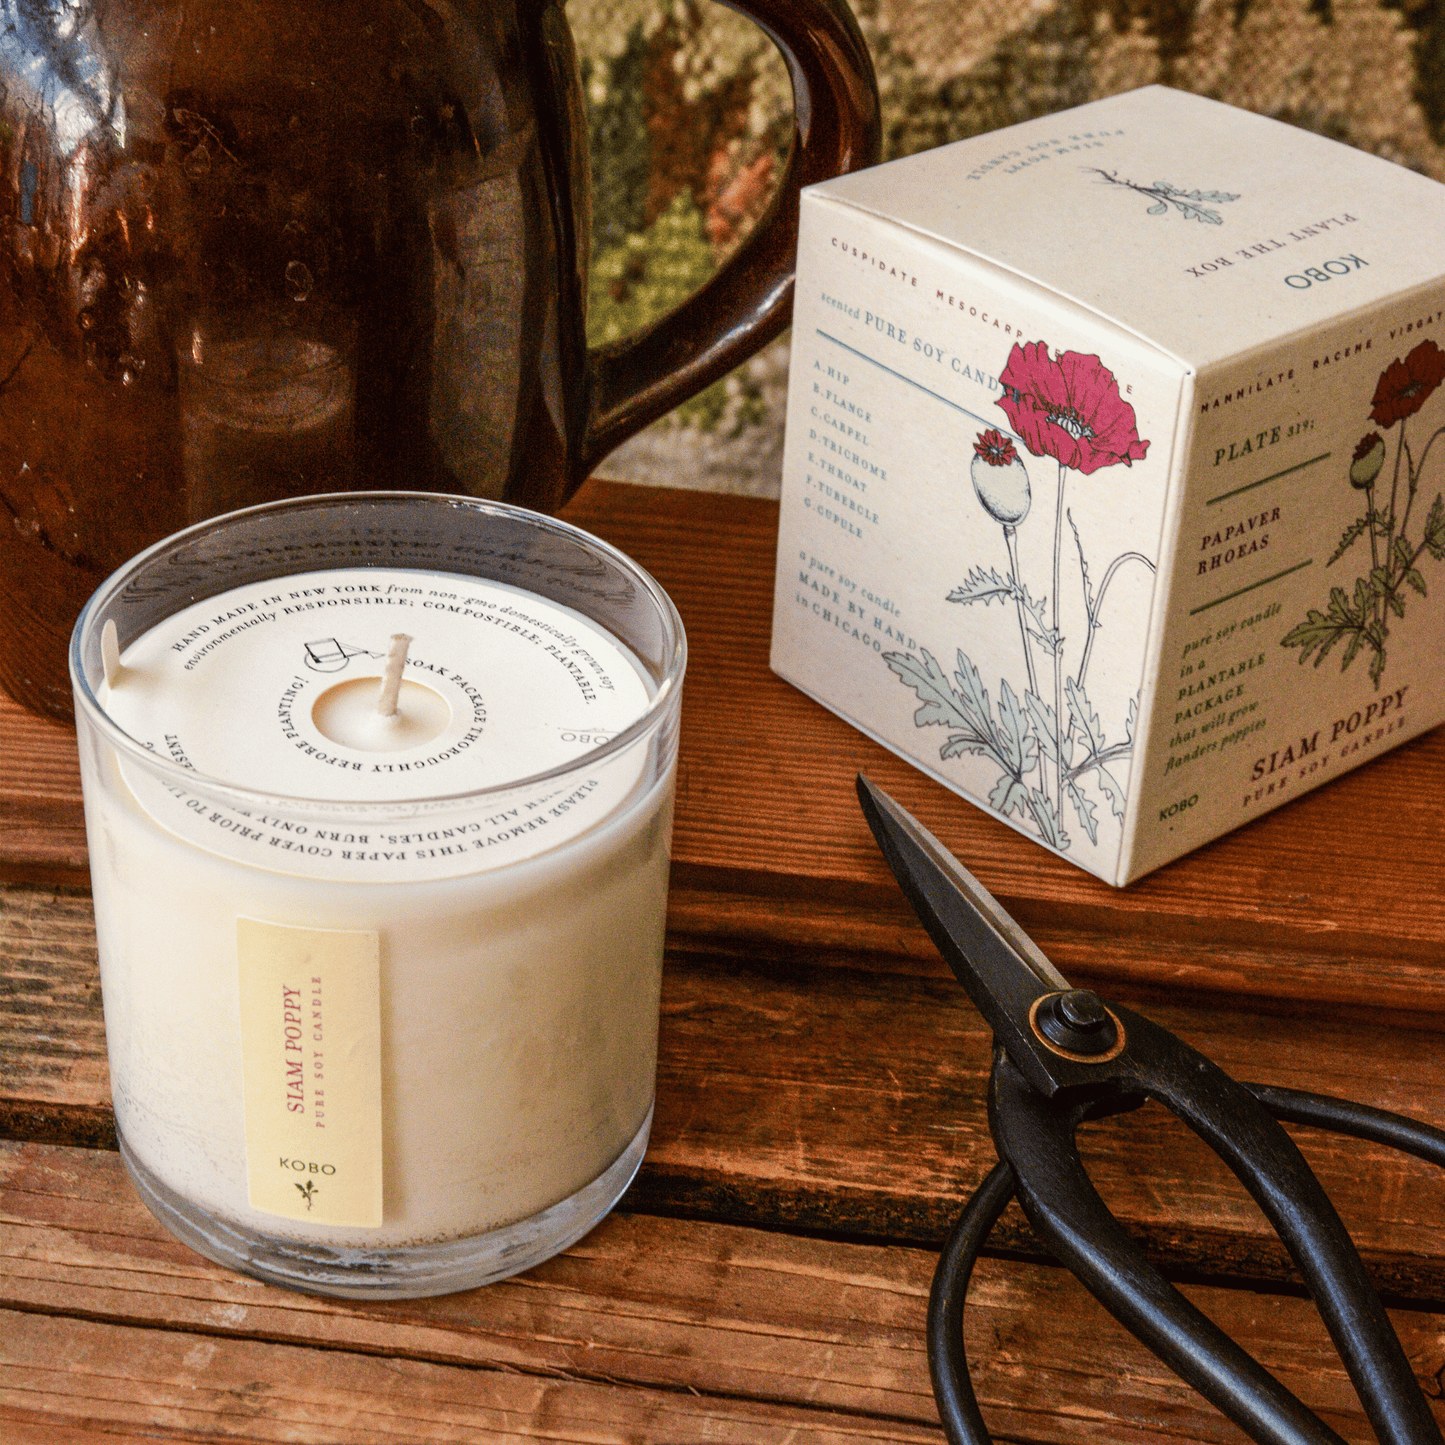 Alternate Image of Siam Poppy Plant the Box Candle